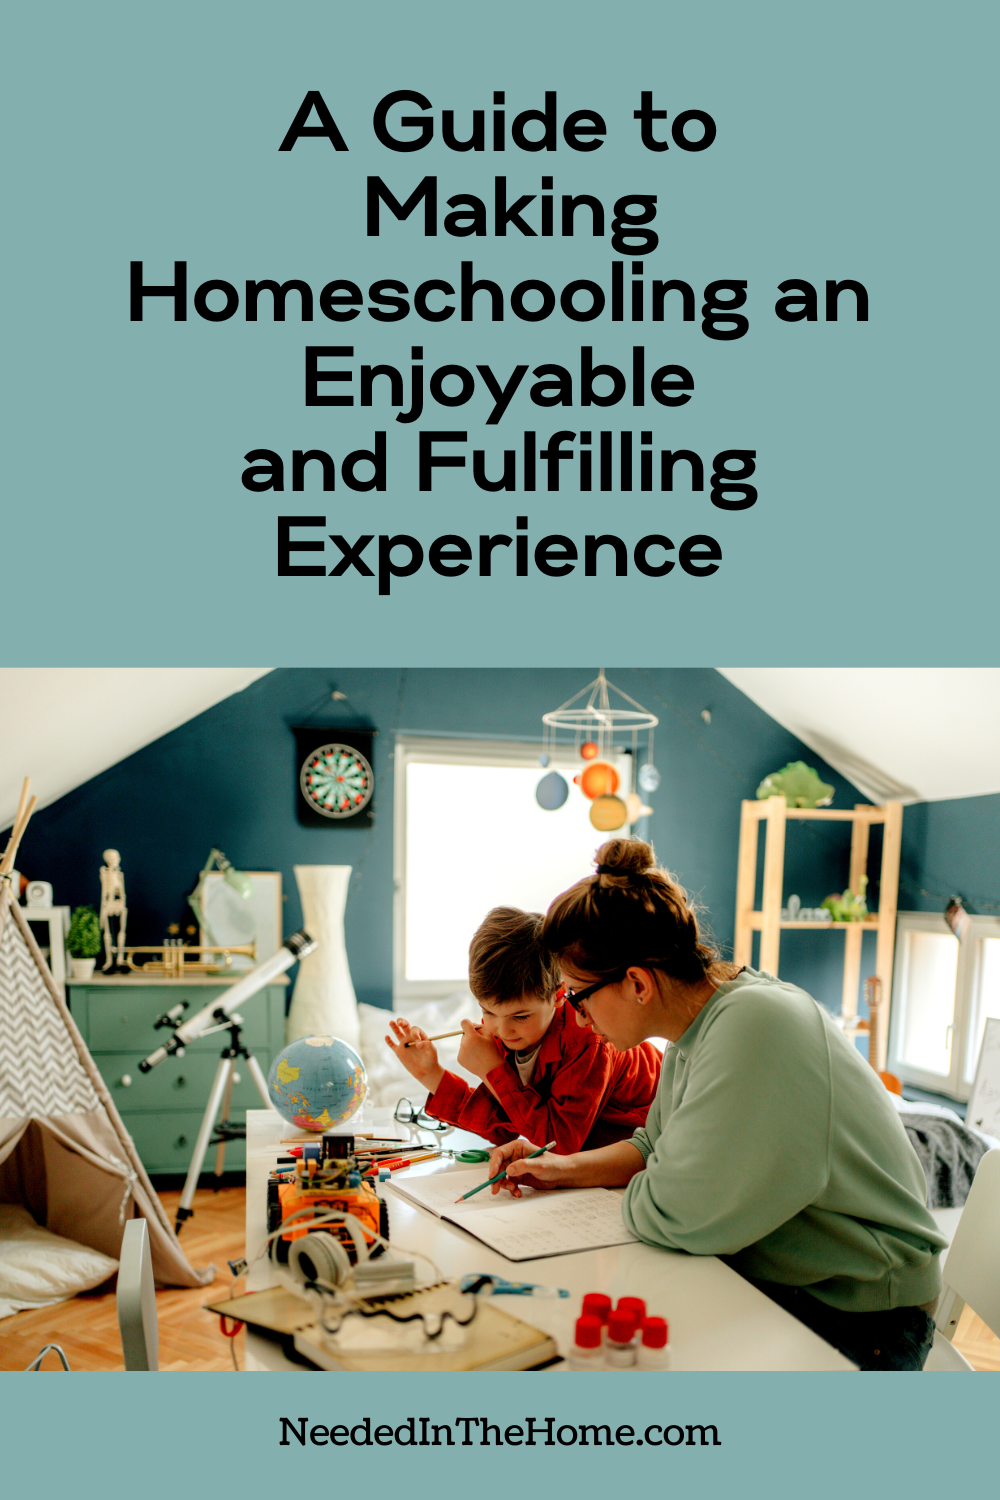 pinterest-pin-description a guide to making homeschooling an enjoyable and fulfilling experience mom and son in homeschool attic room learning geography with globe nearby neededinthehome